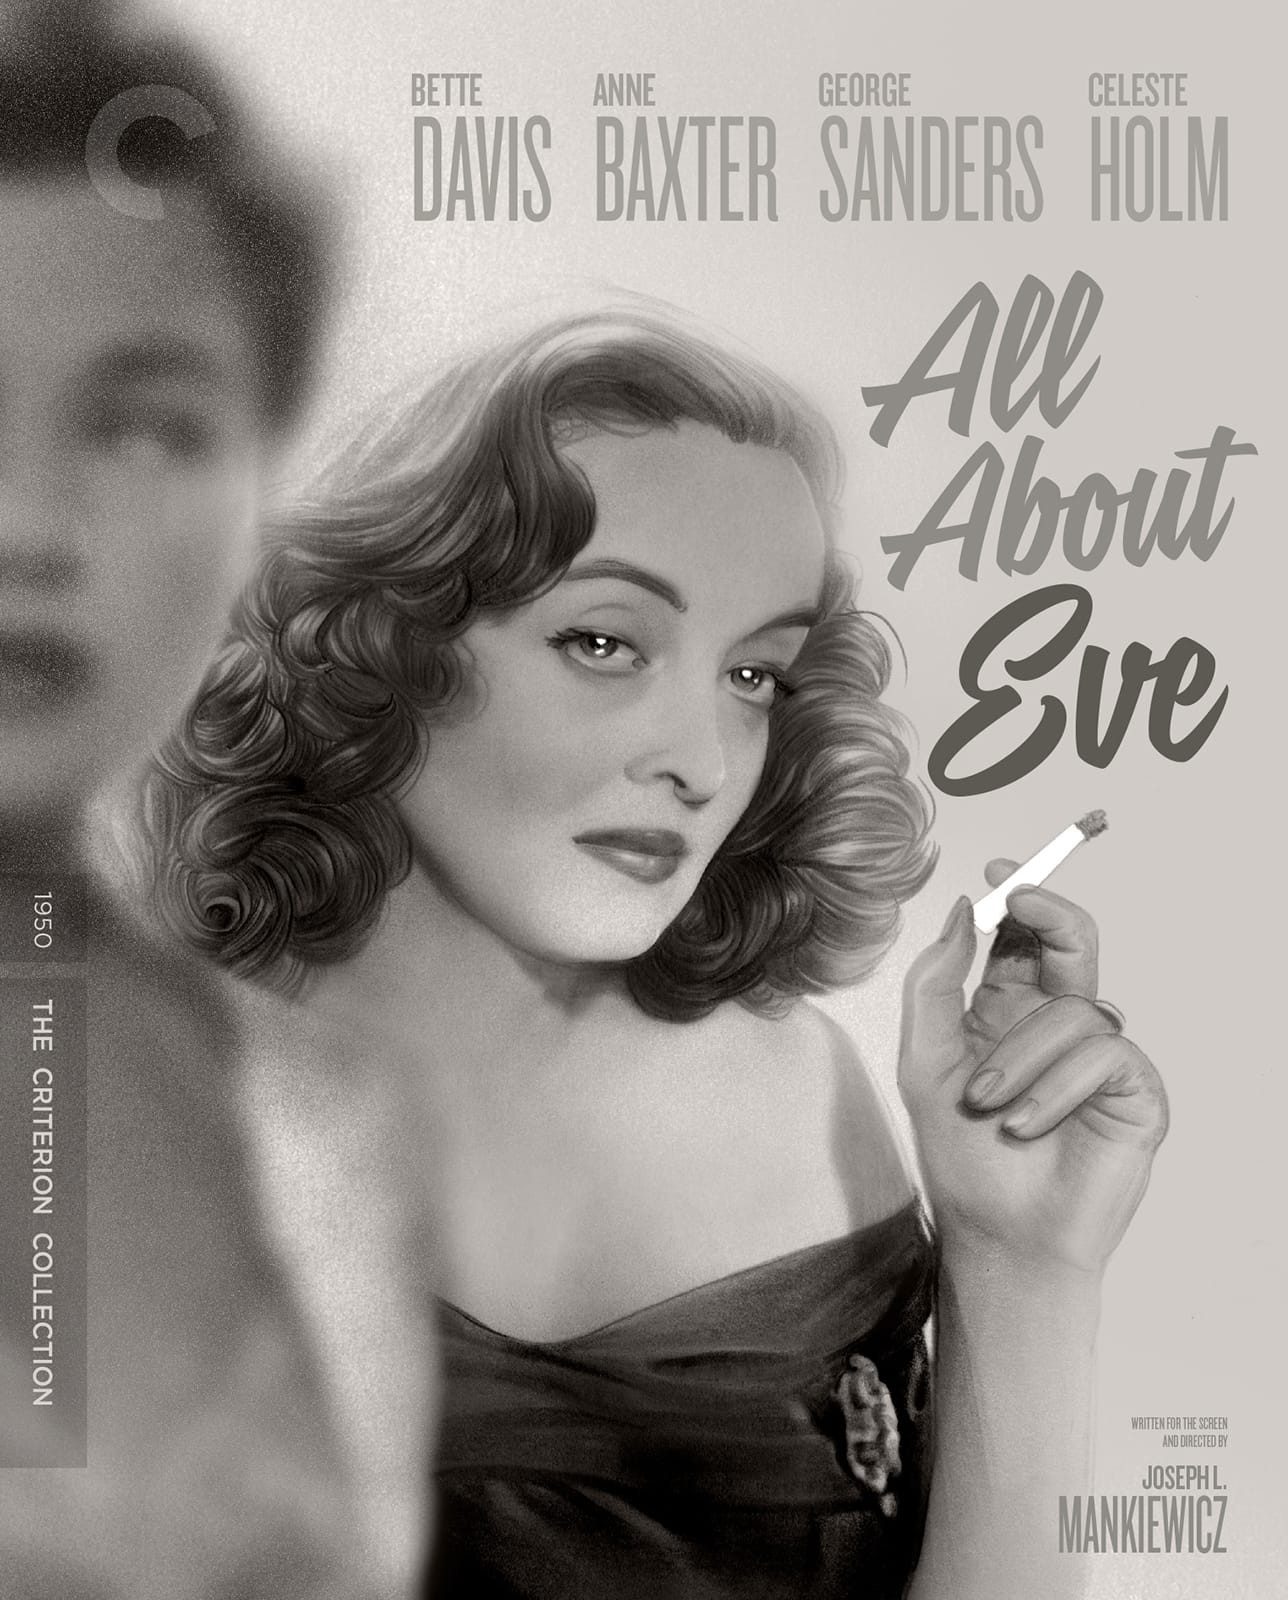 All About Eve (1950). The Criterion Collection